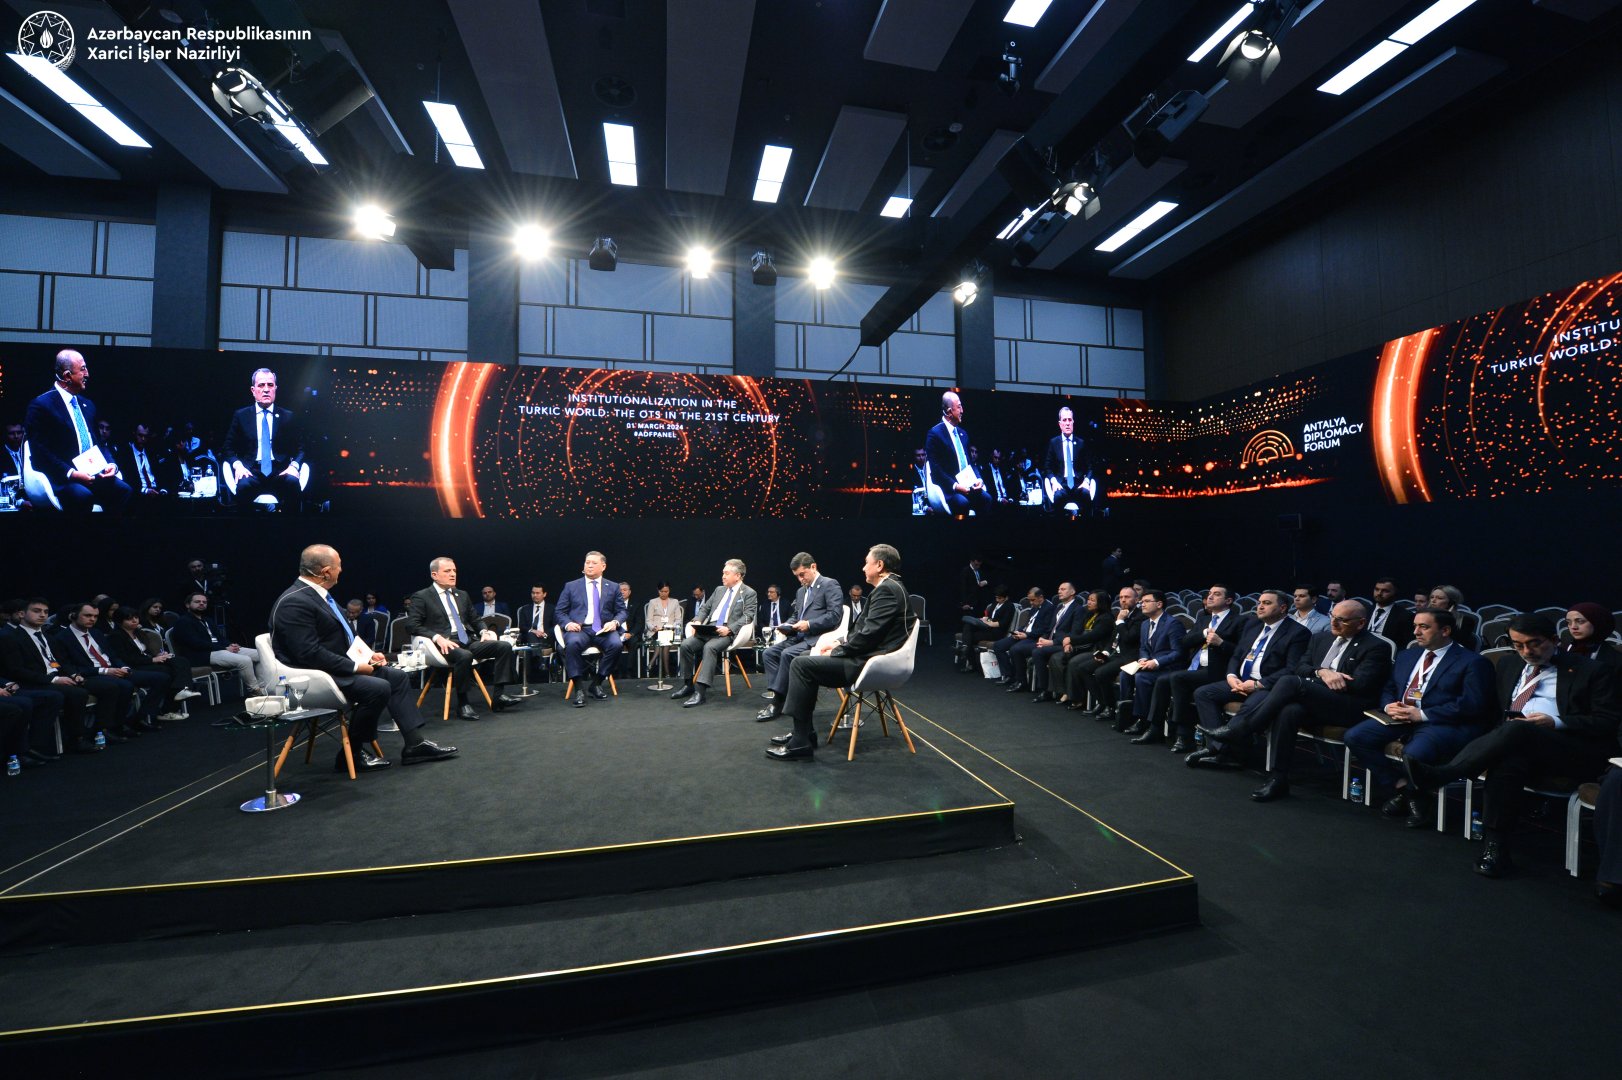 Azerbaijani FM takes part in panel discussions at Antalya Diplomatic Forum (PHOTO)